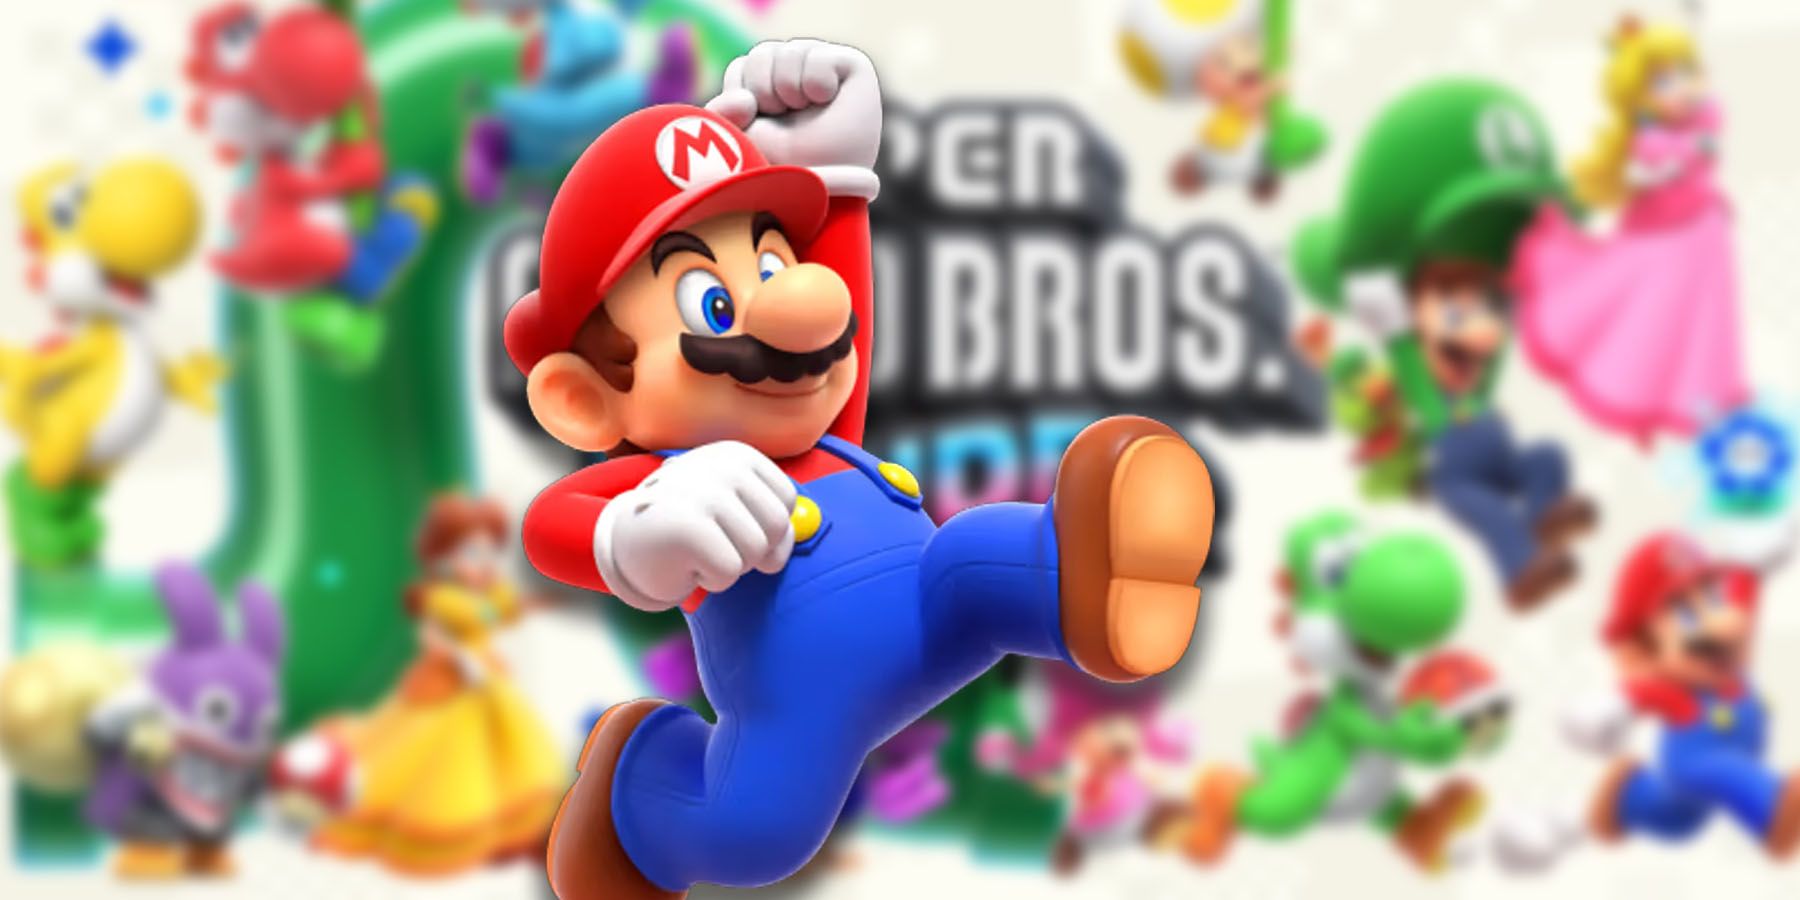 Super Mario Bros Wonder release date, pre-order and latest news